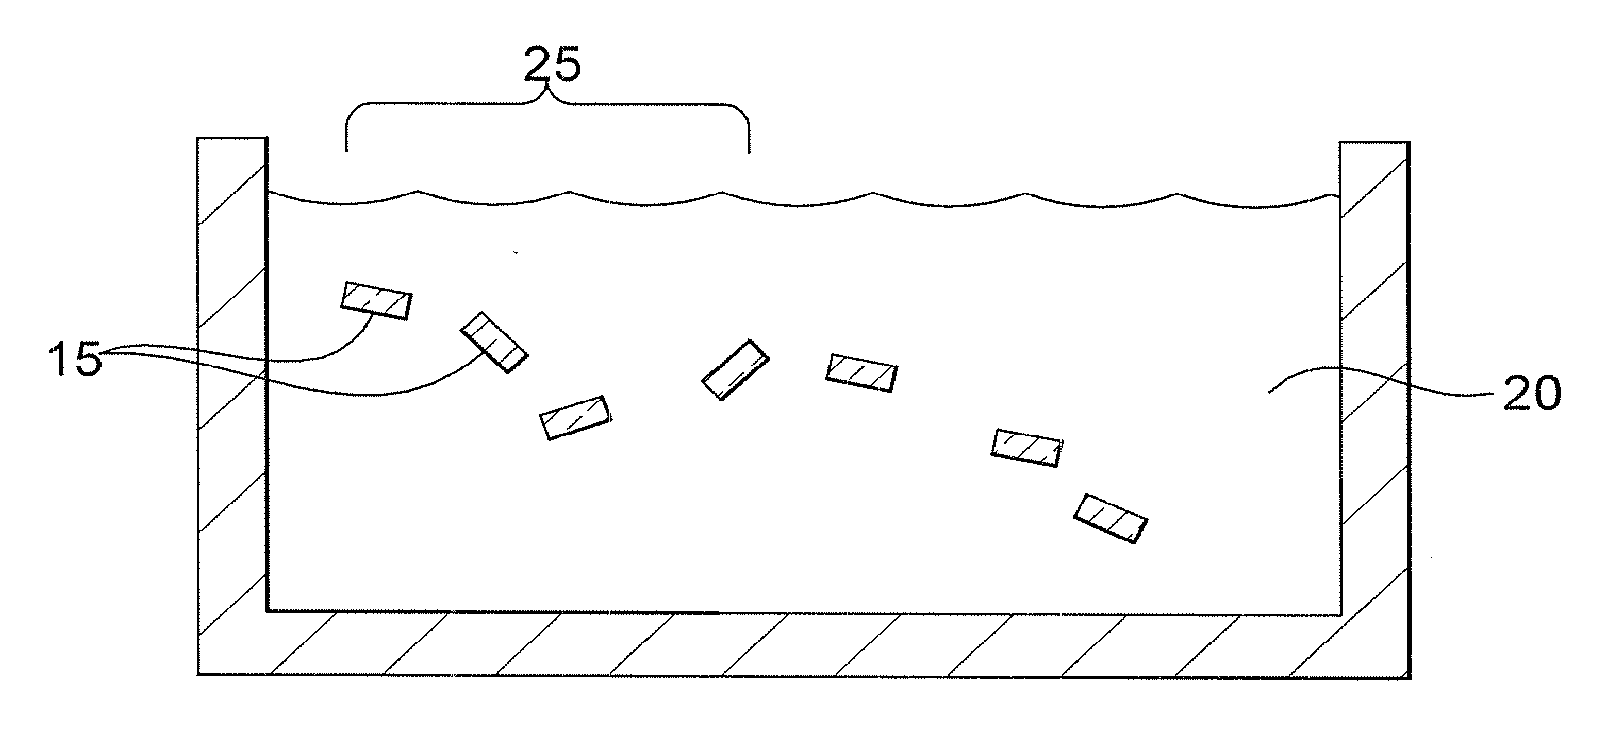 Hermetically Sealed Electronic Device Using Coated Glass Flakes